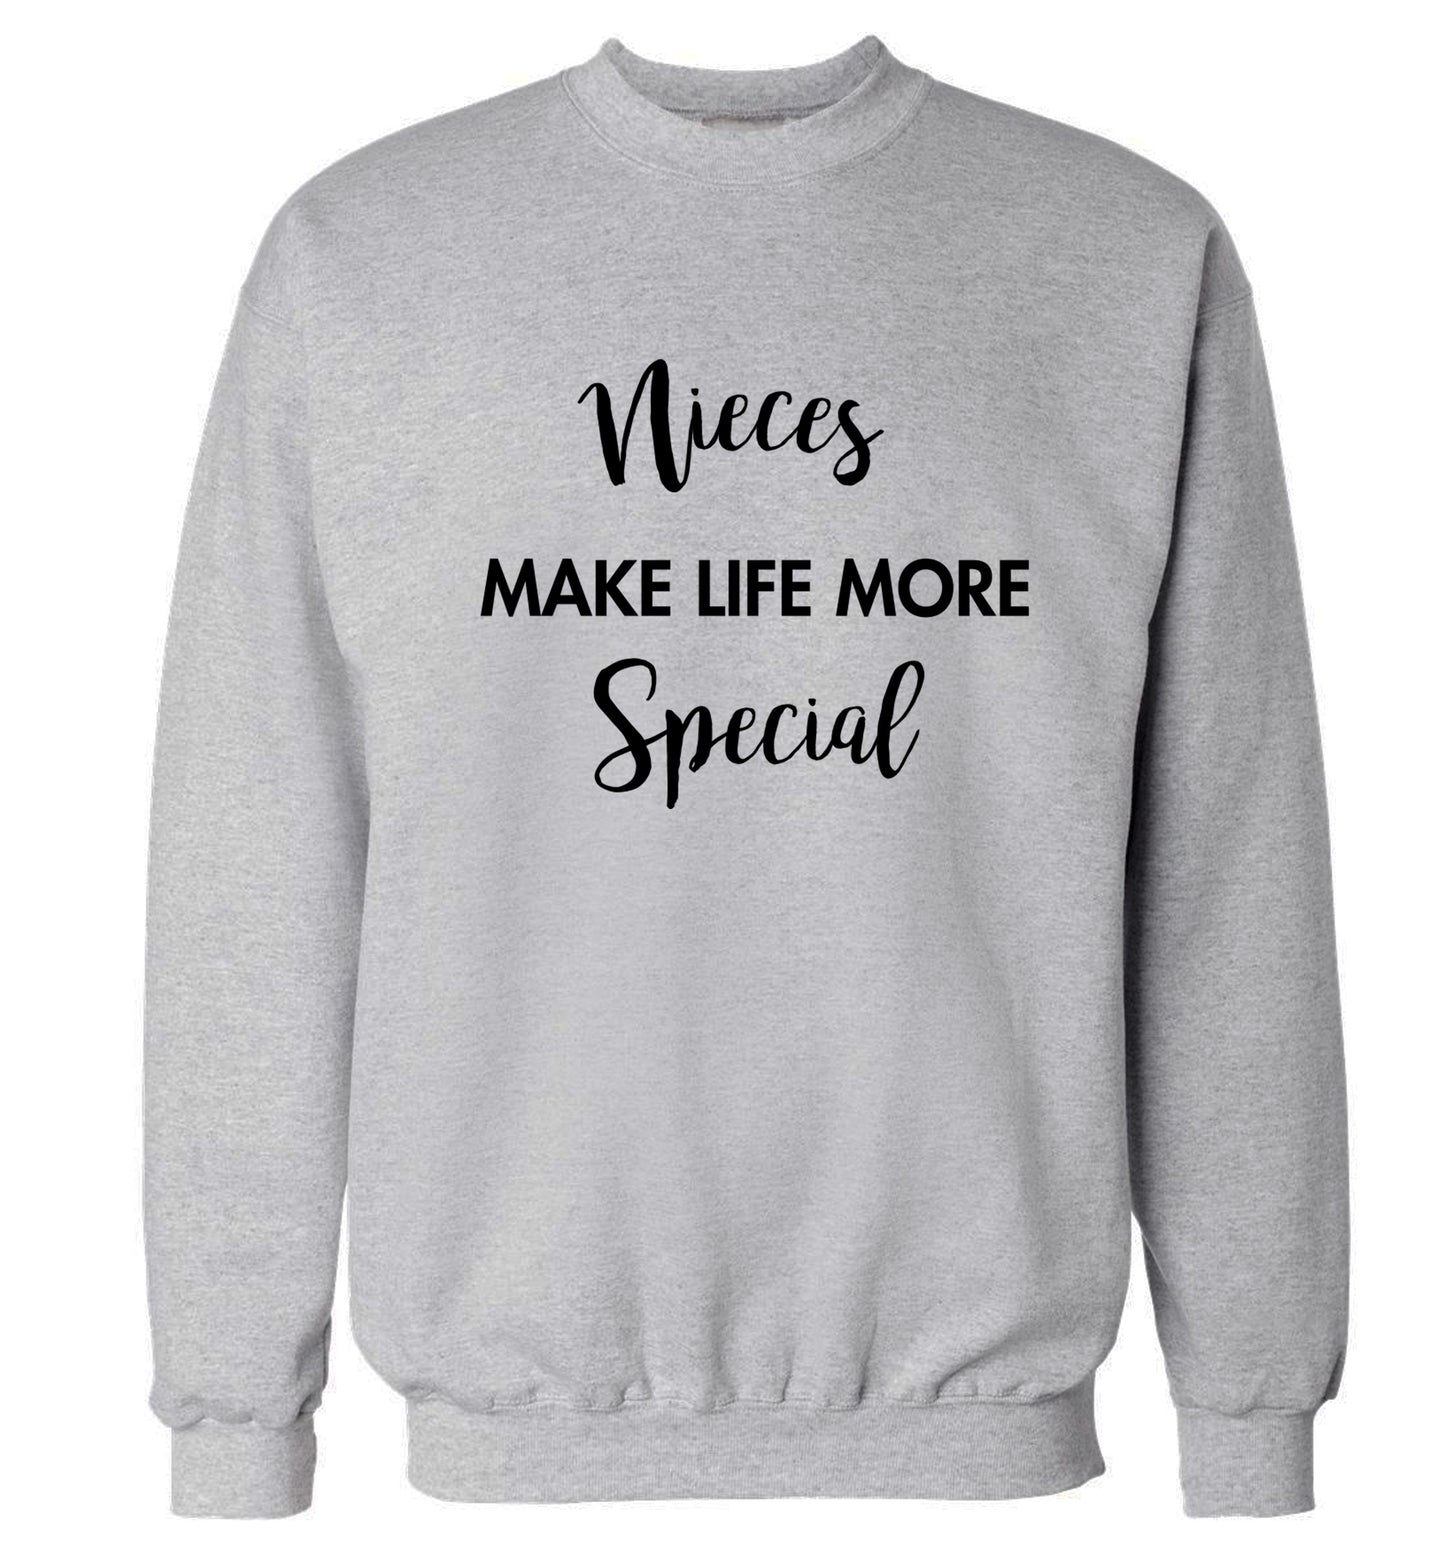 Nieces make life more special Adult's unisex grey Sweater 2XL